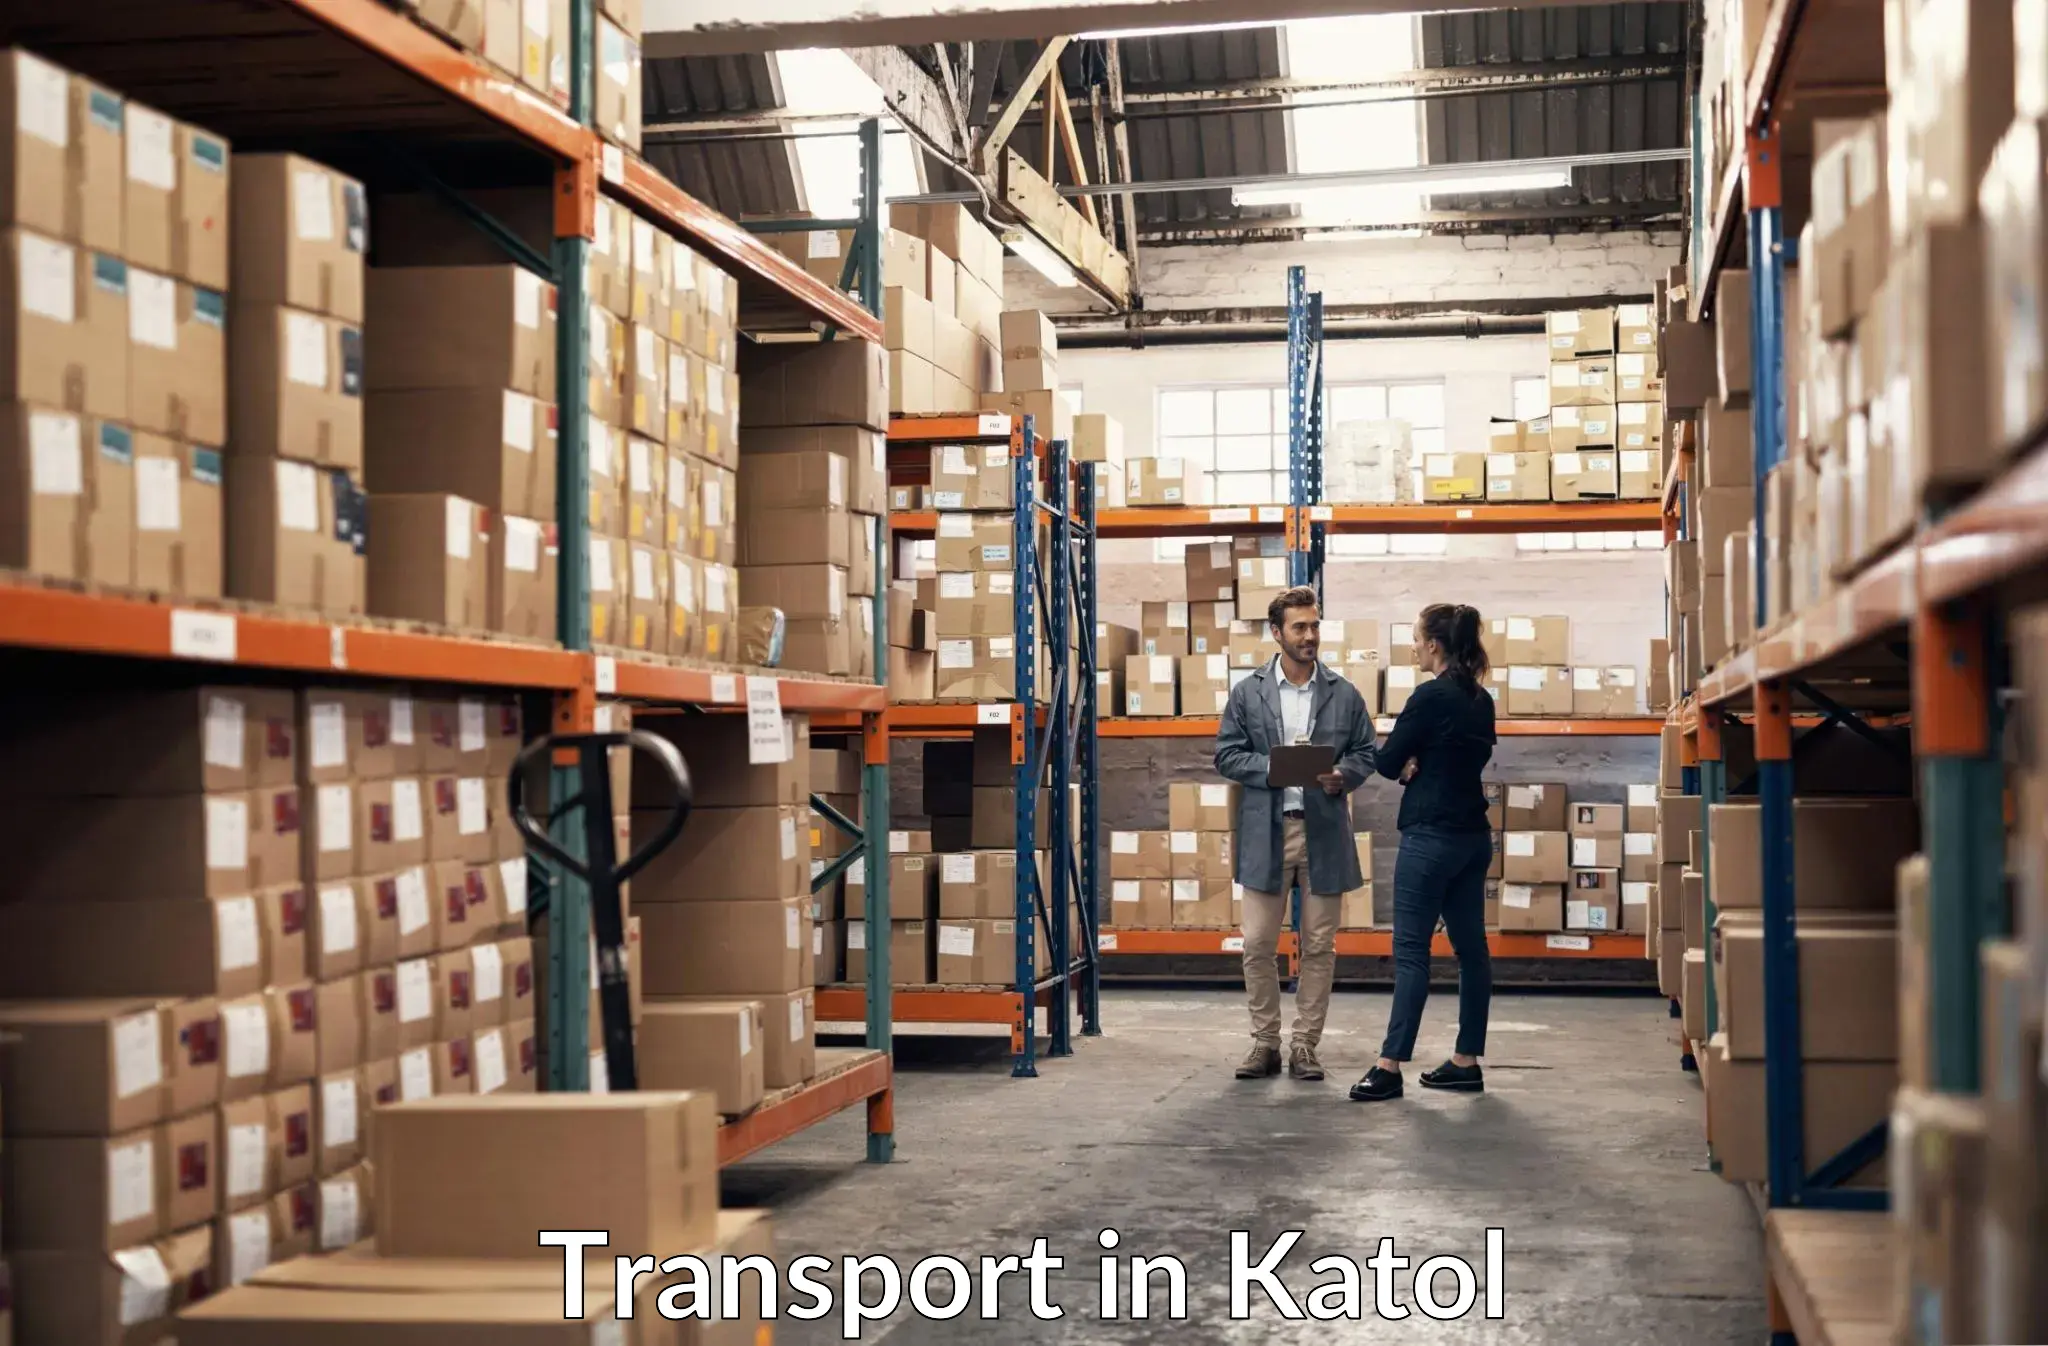 Daily parcel service transport in Katol